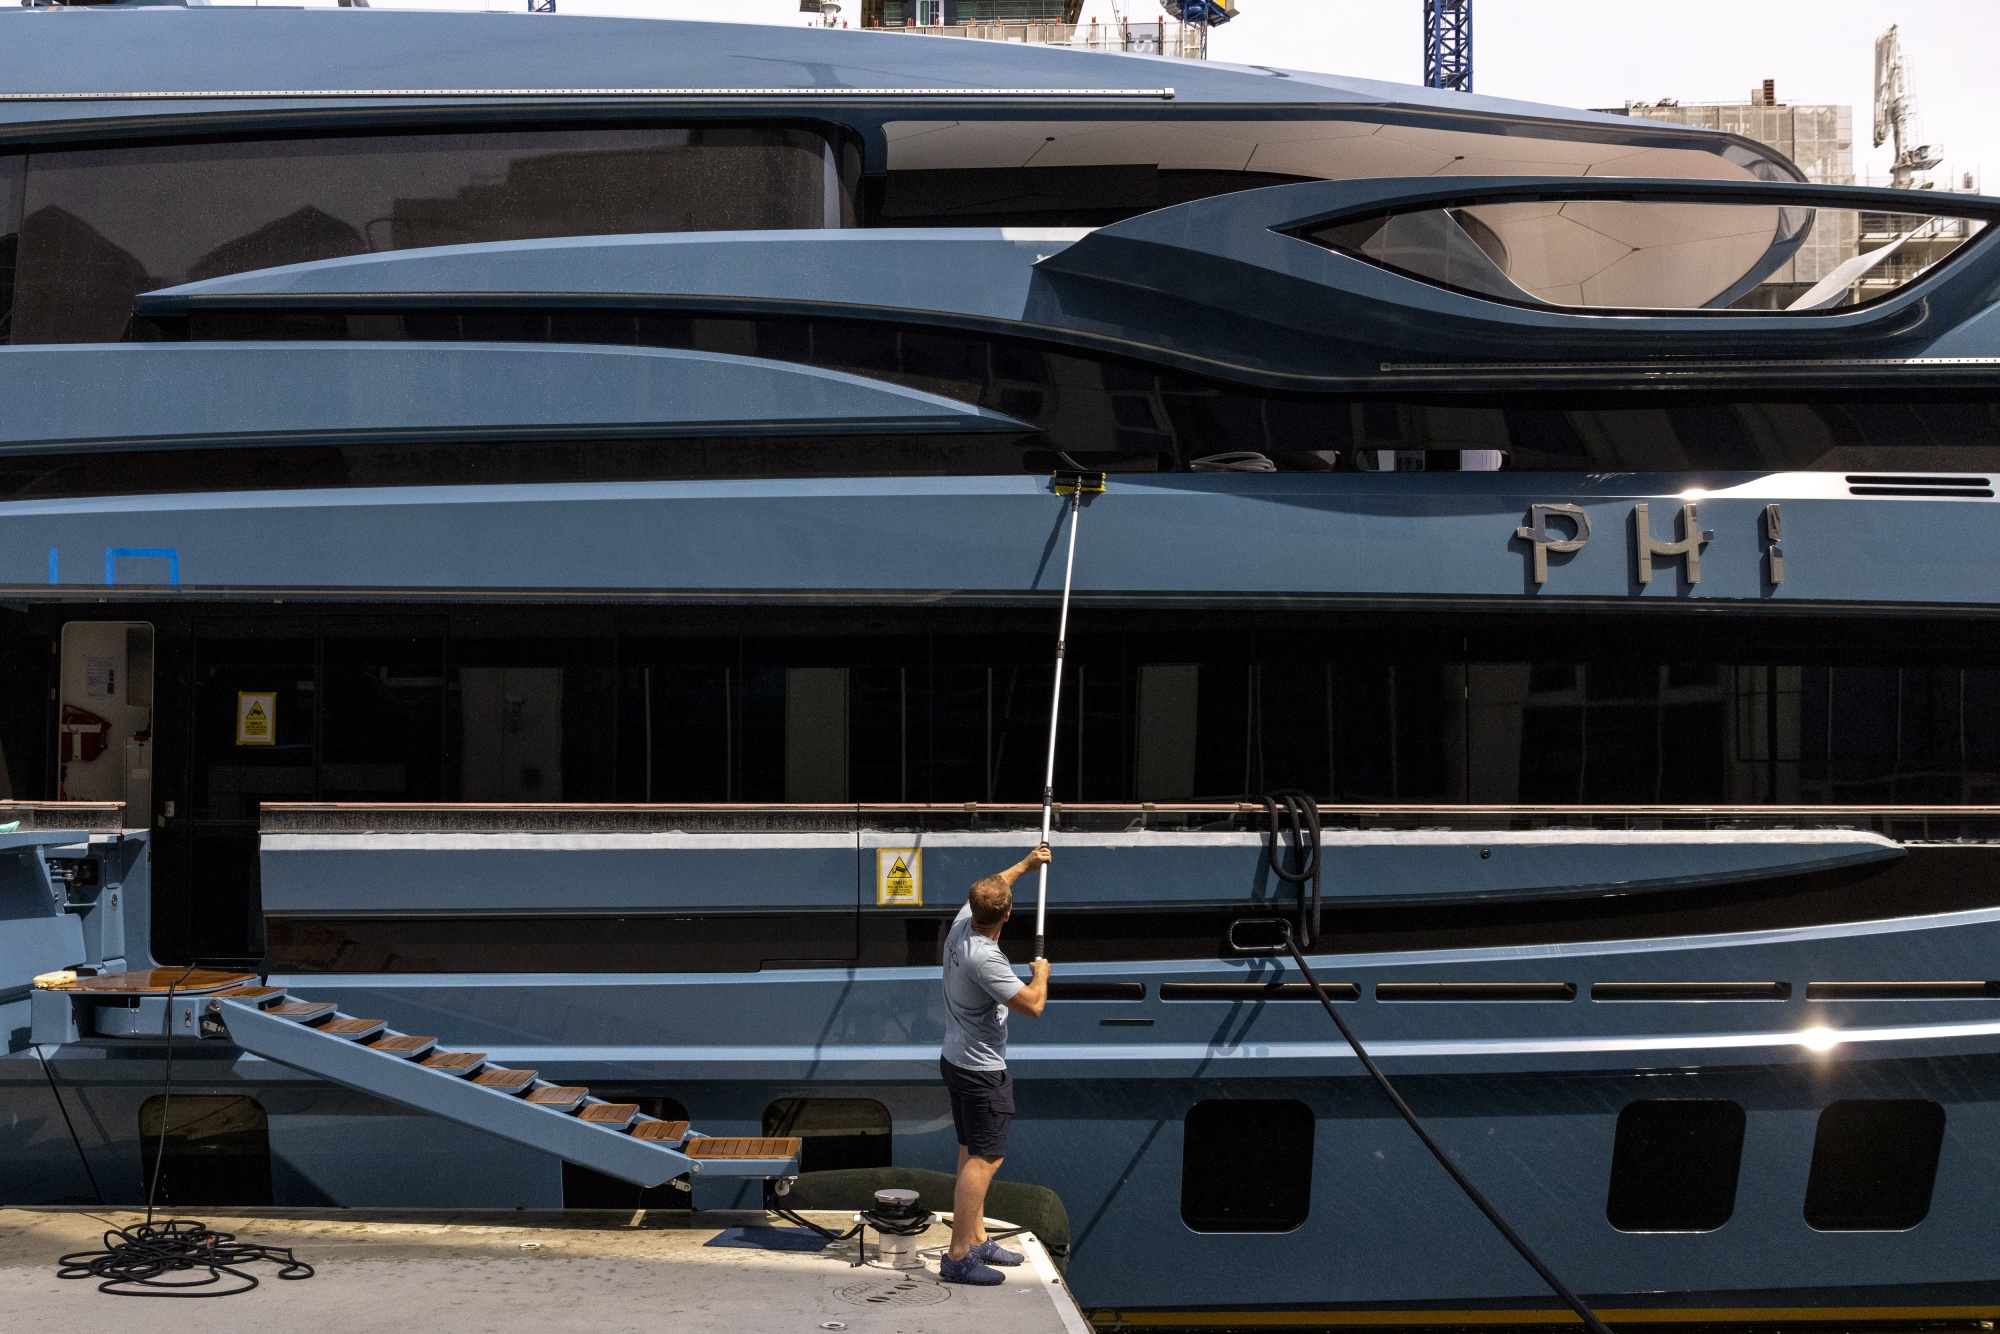 A worker cleans the Phi 192-foot superyacht impounded at a dock near Canary Wharf in London, UK, on Thursday, May 18, 2023.